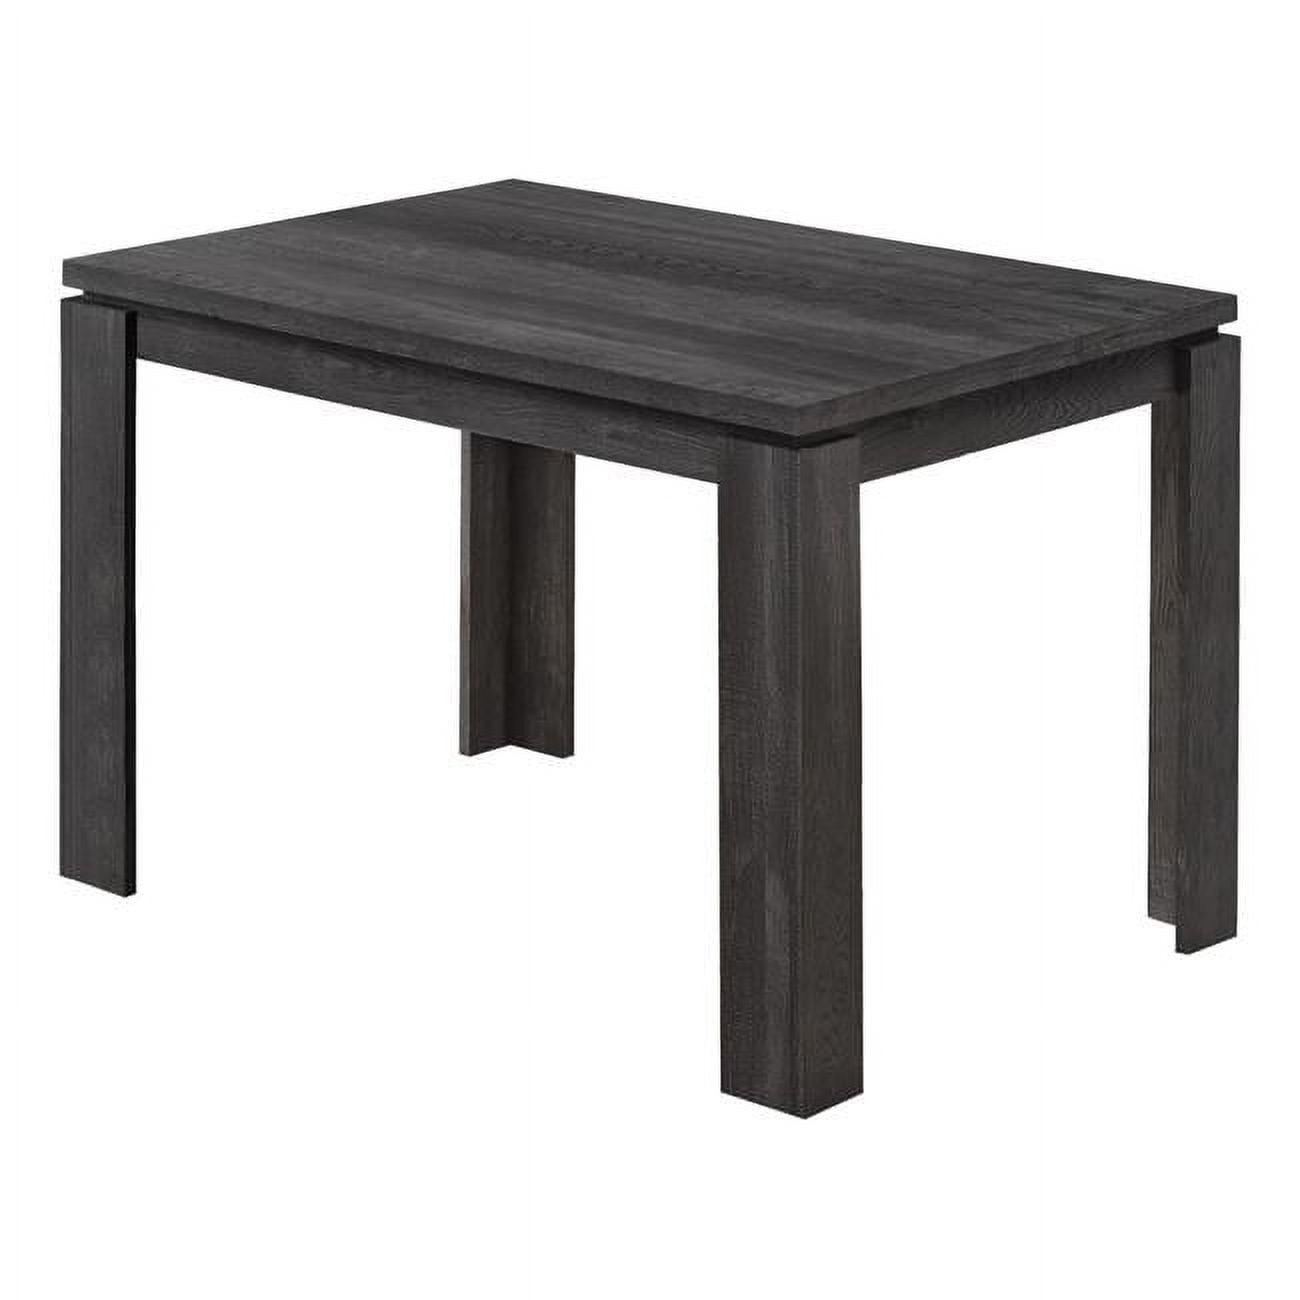 Farmhouse Black Reclaimed Wood and Marble Dining Table 48"x32"